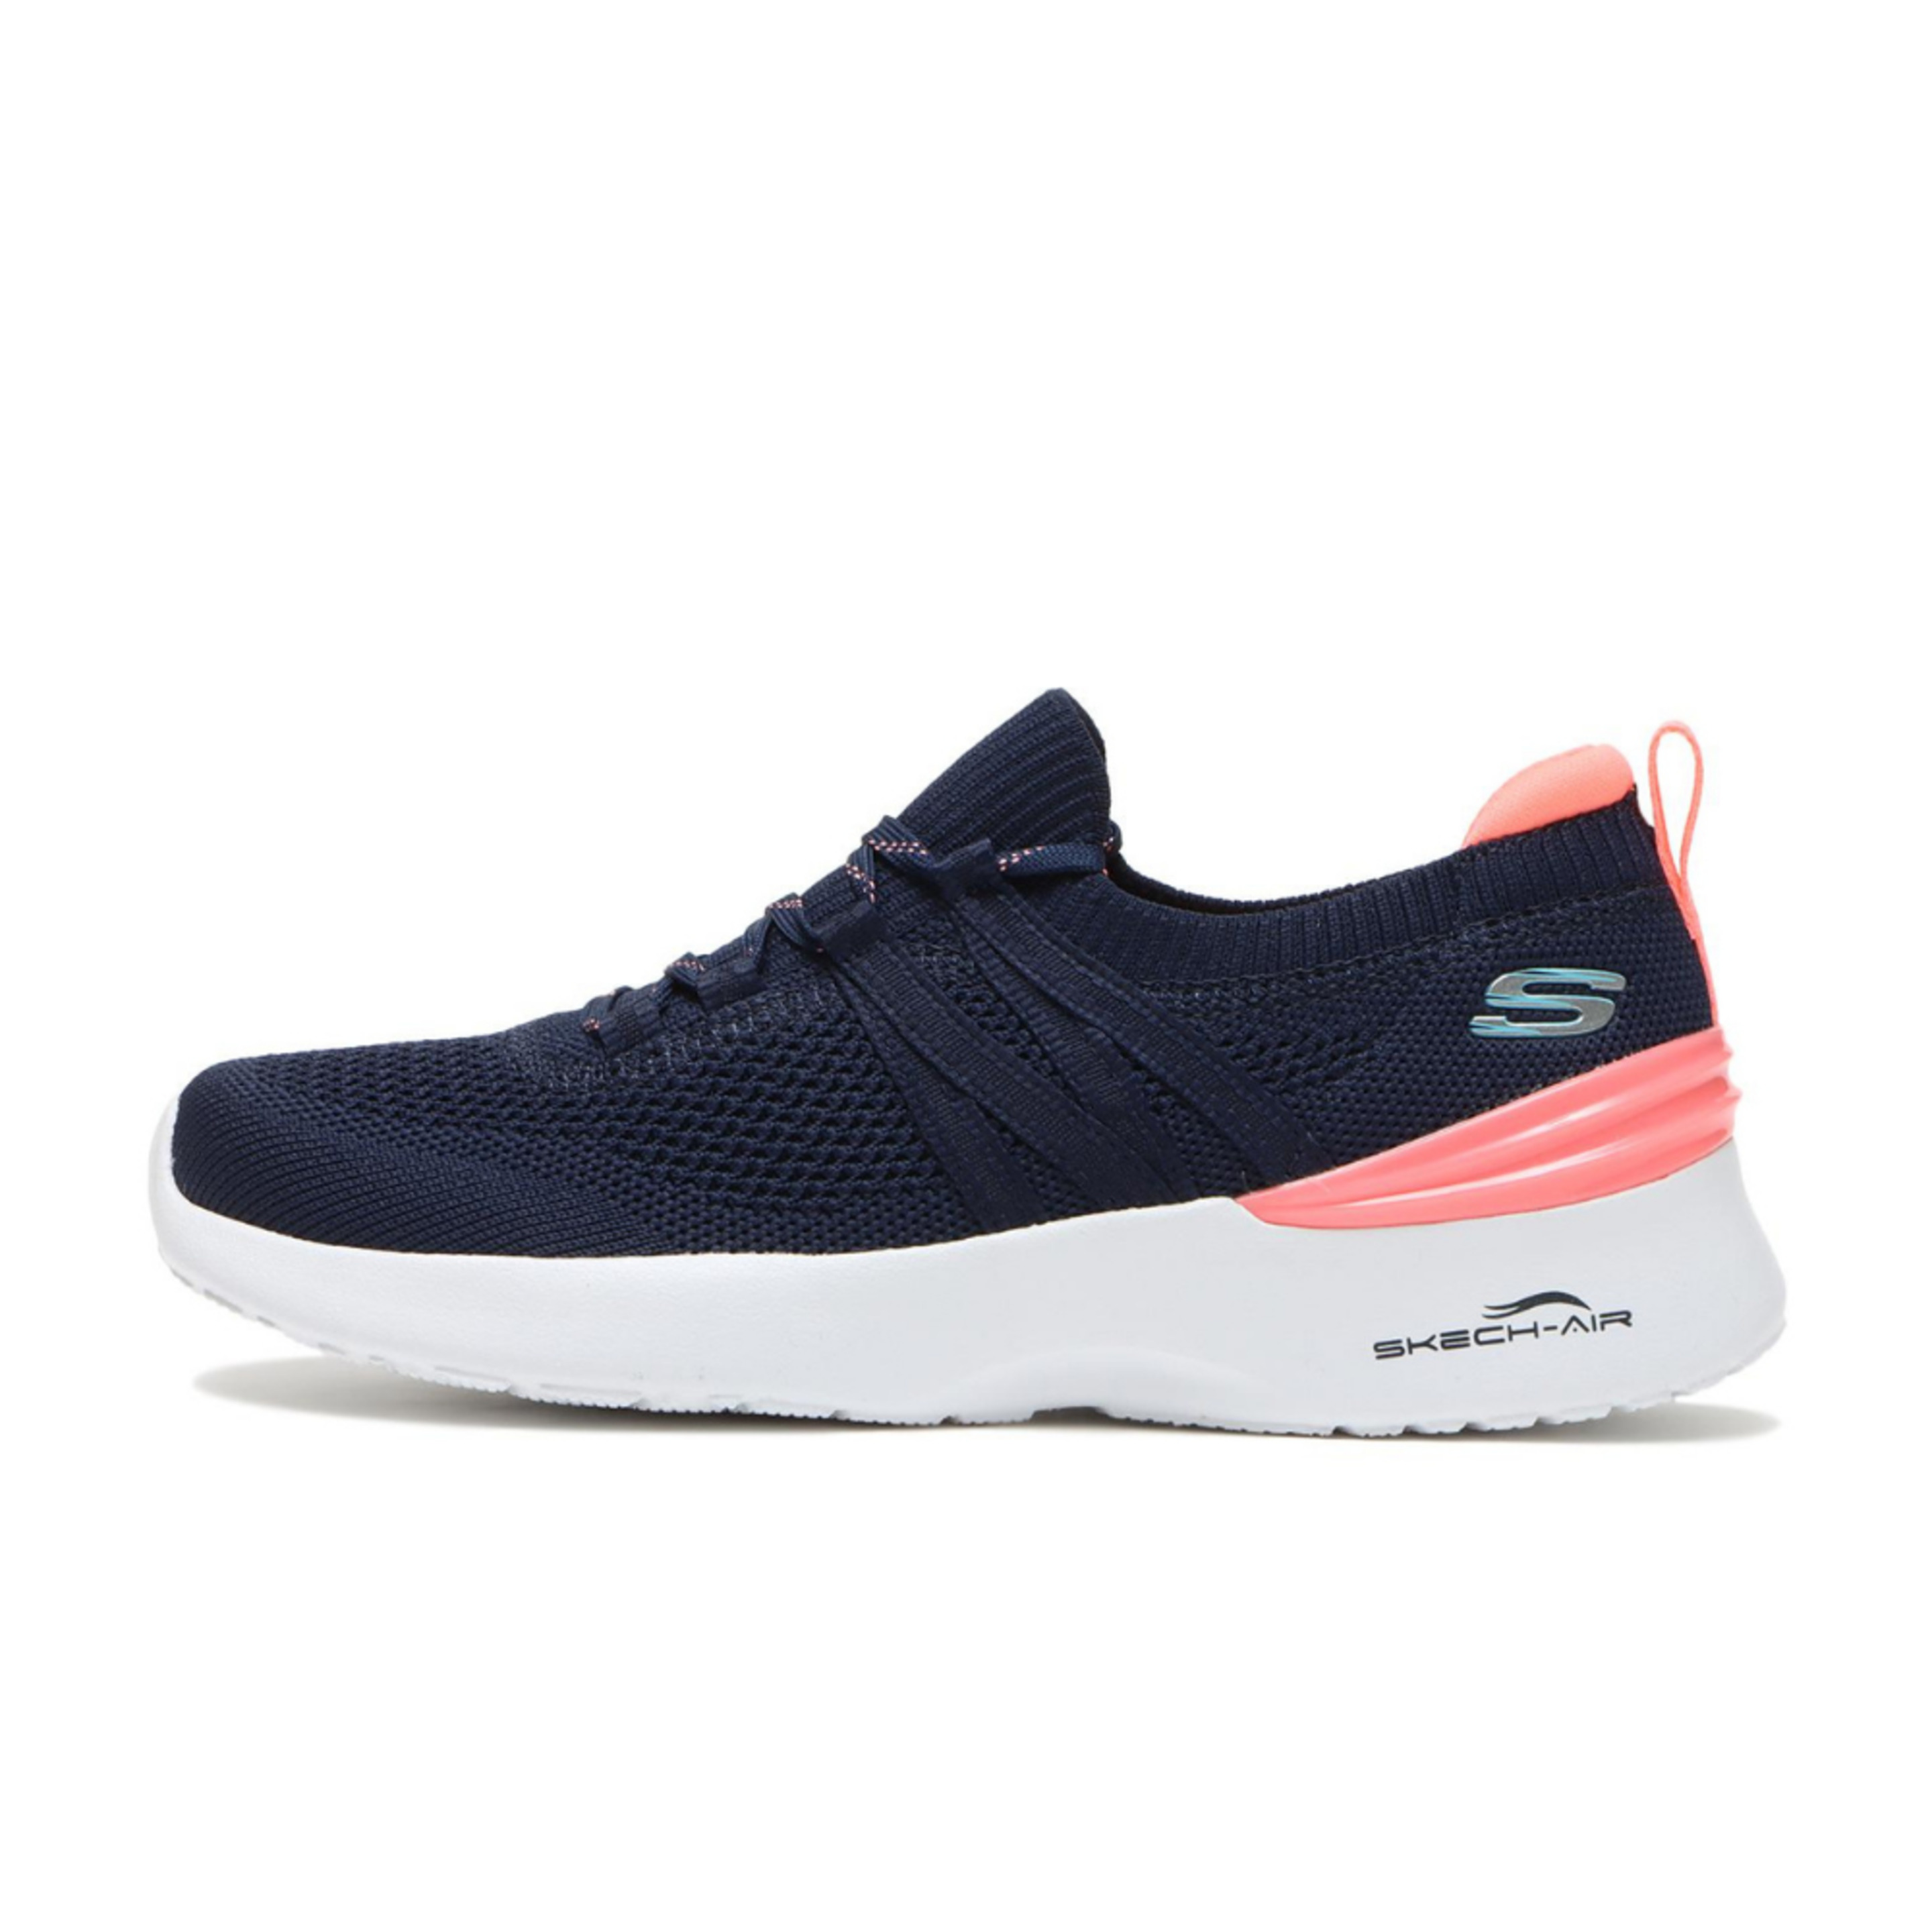 Skechers Dynamight Bright Cheer. 149750/nvlc